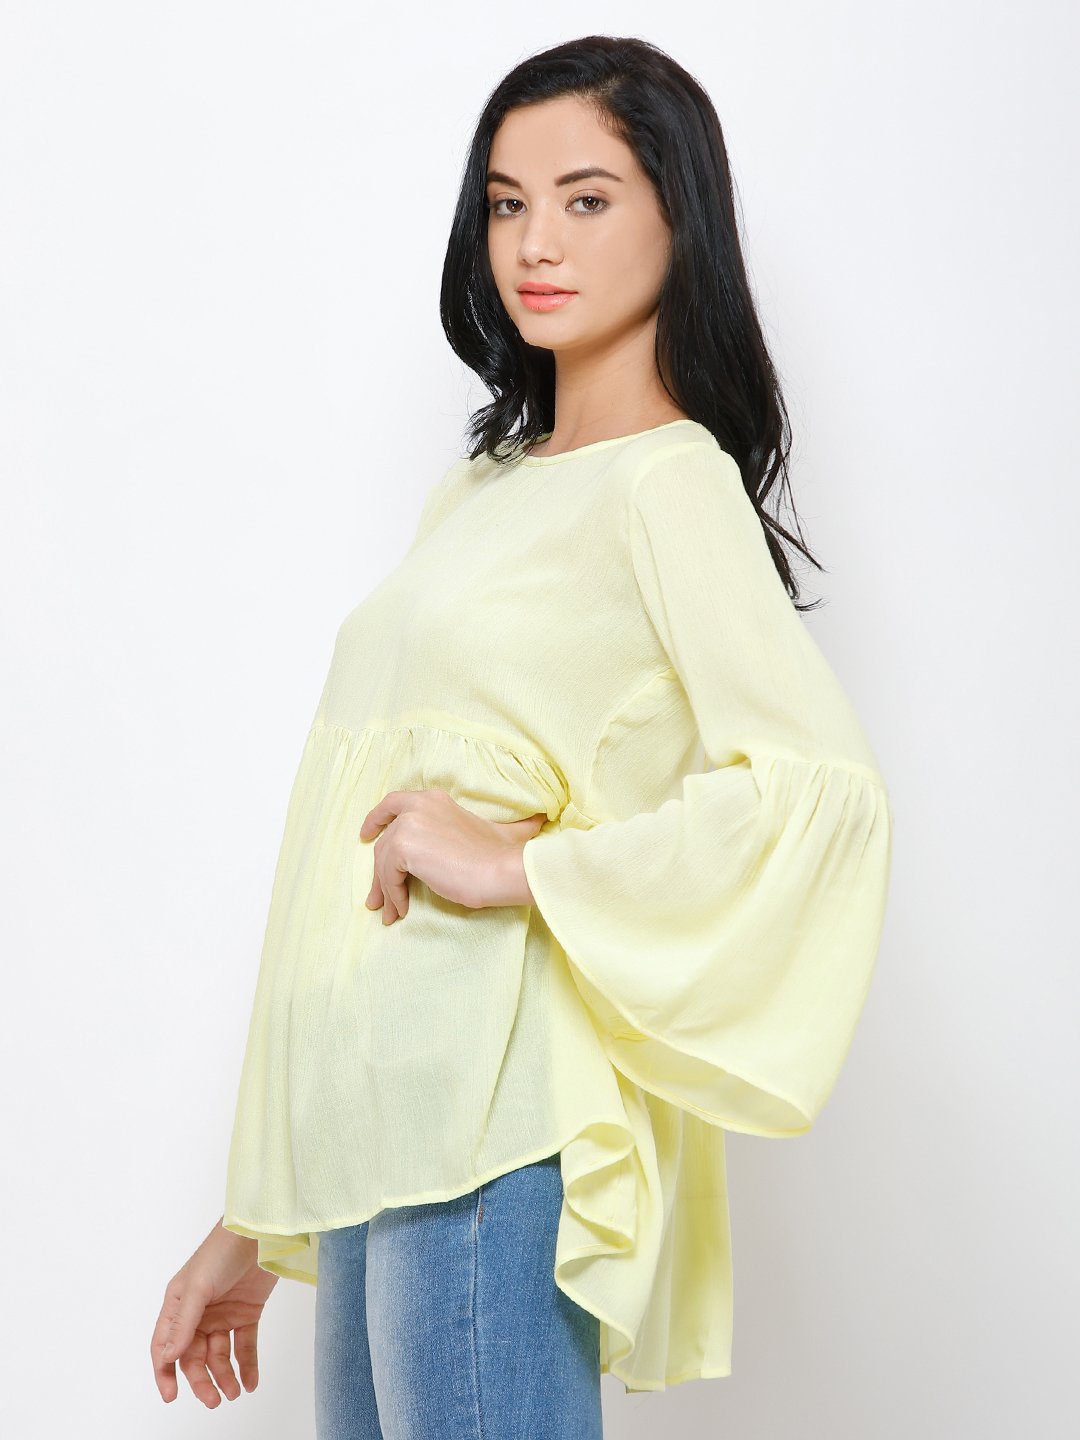 Yellow solid top